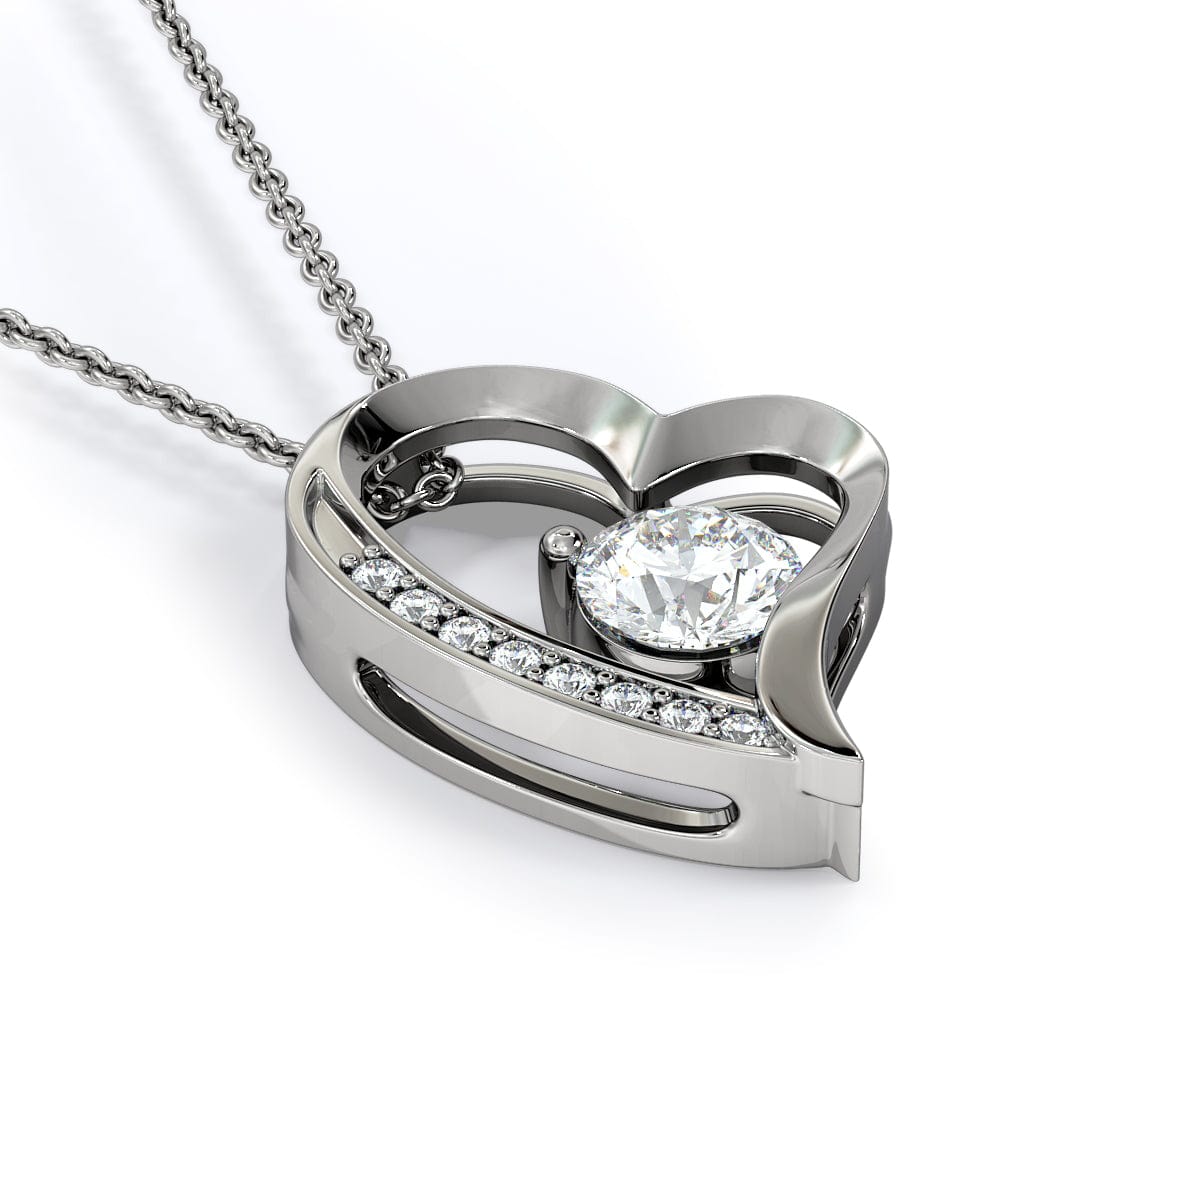 TO MY WIFE | Personalized Necklace Gift with Custom Message Card